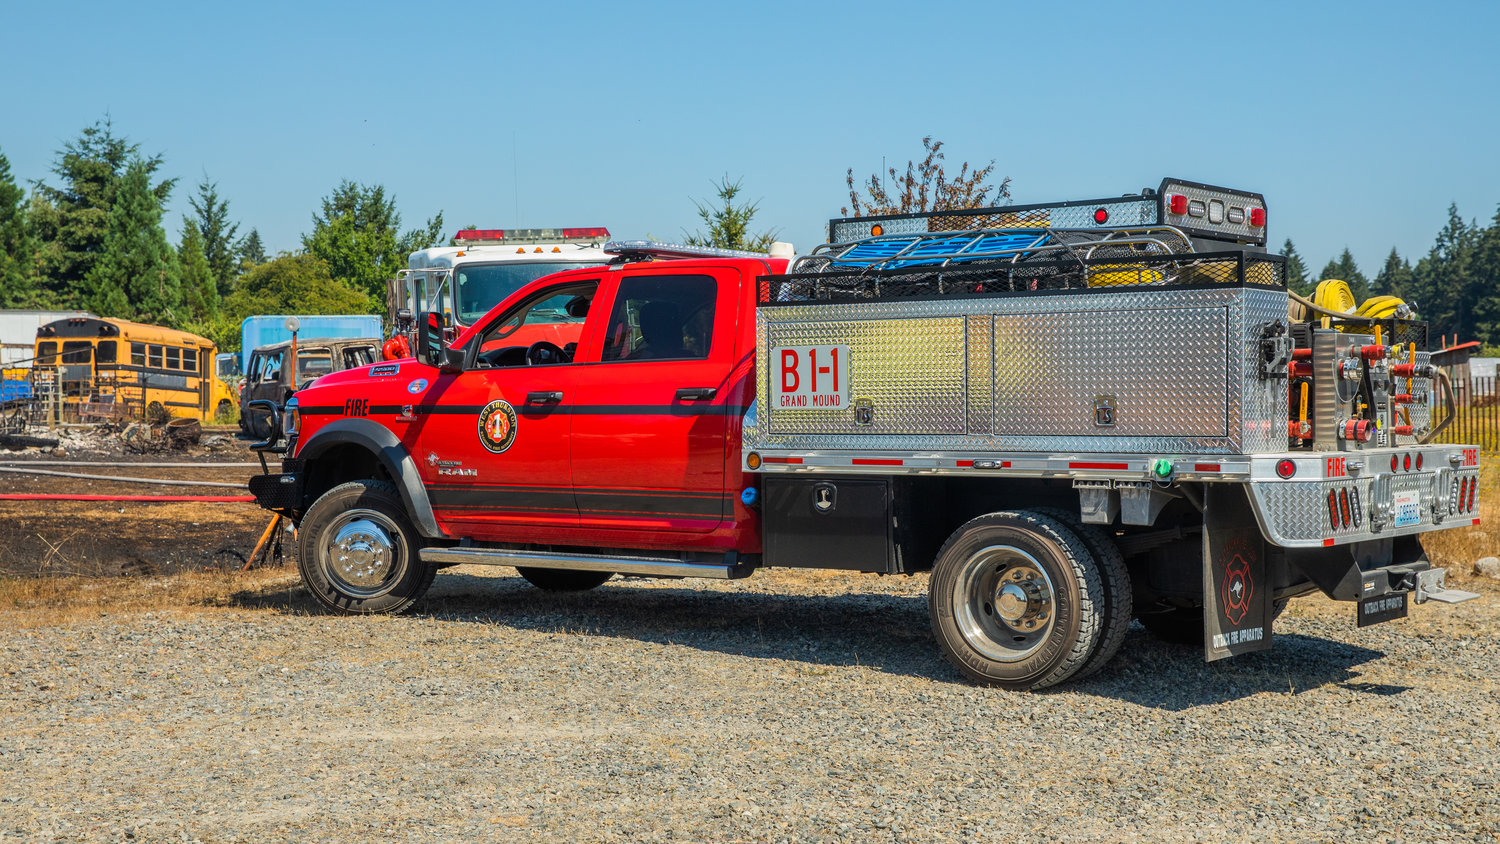 A West Thurston Fire truck is seen parked alongside scorched grass in Rochester on Sunday following a fire.